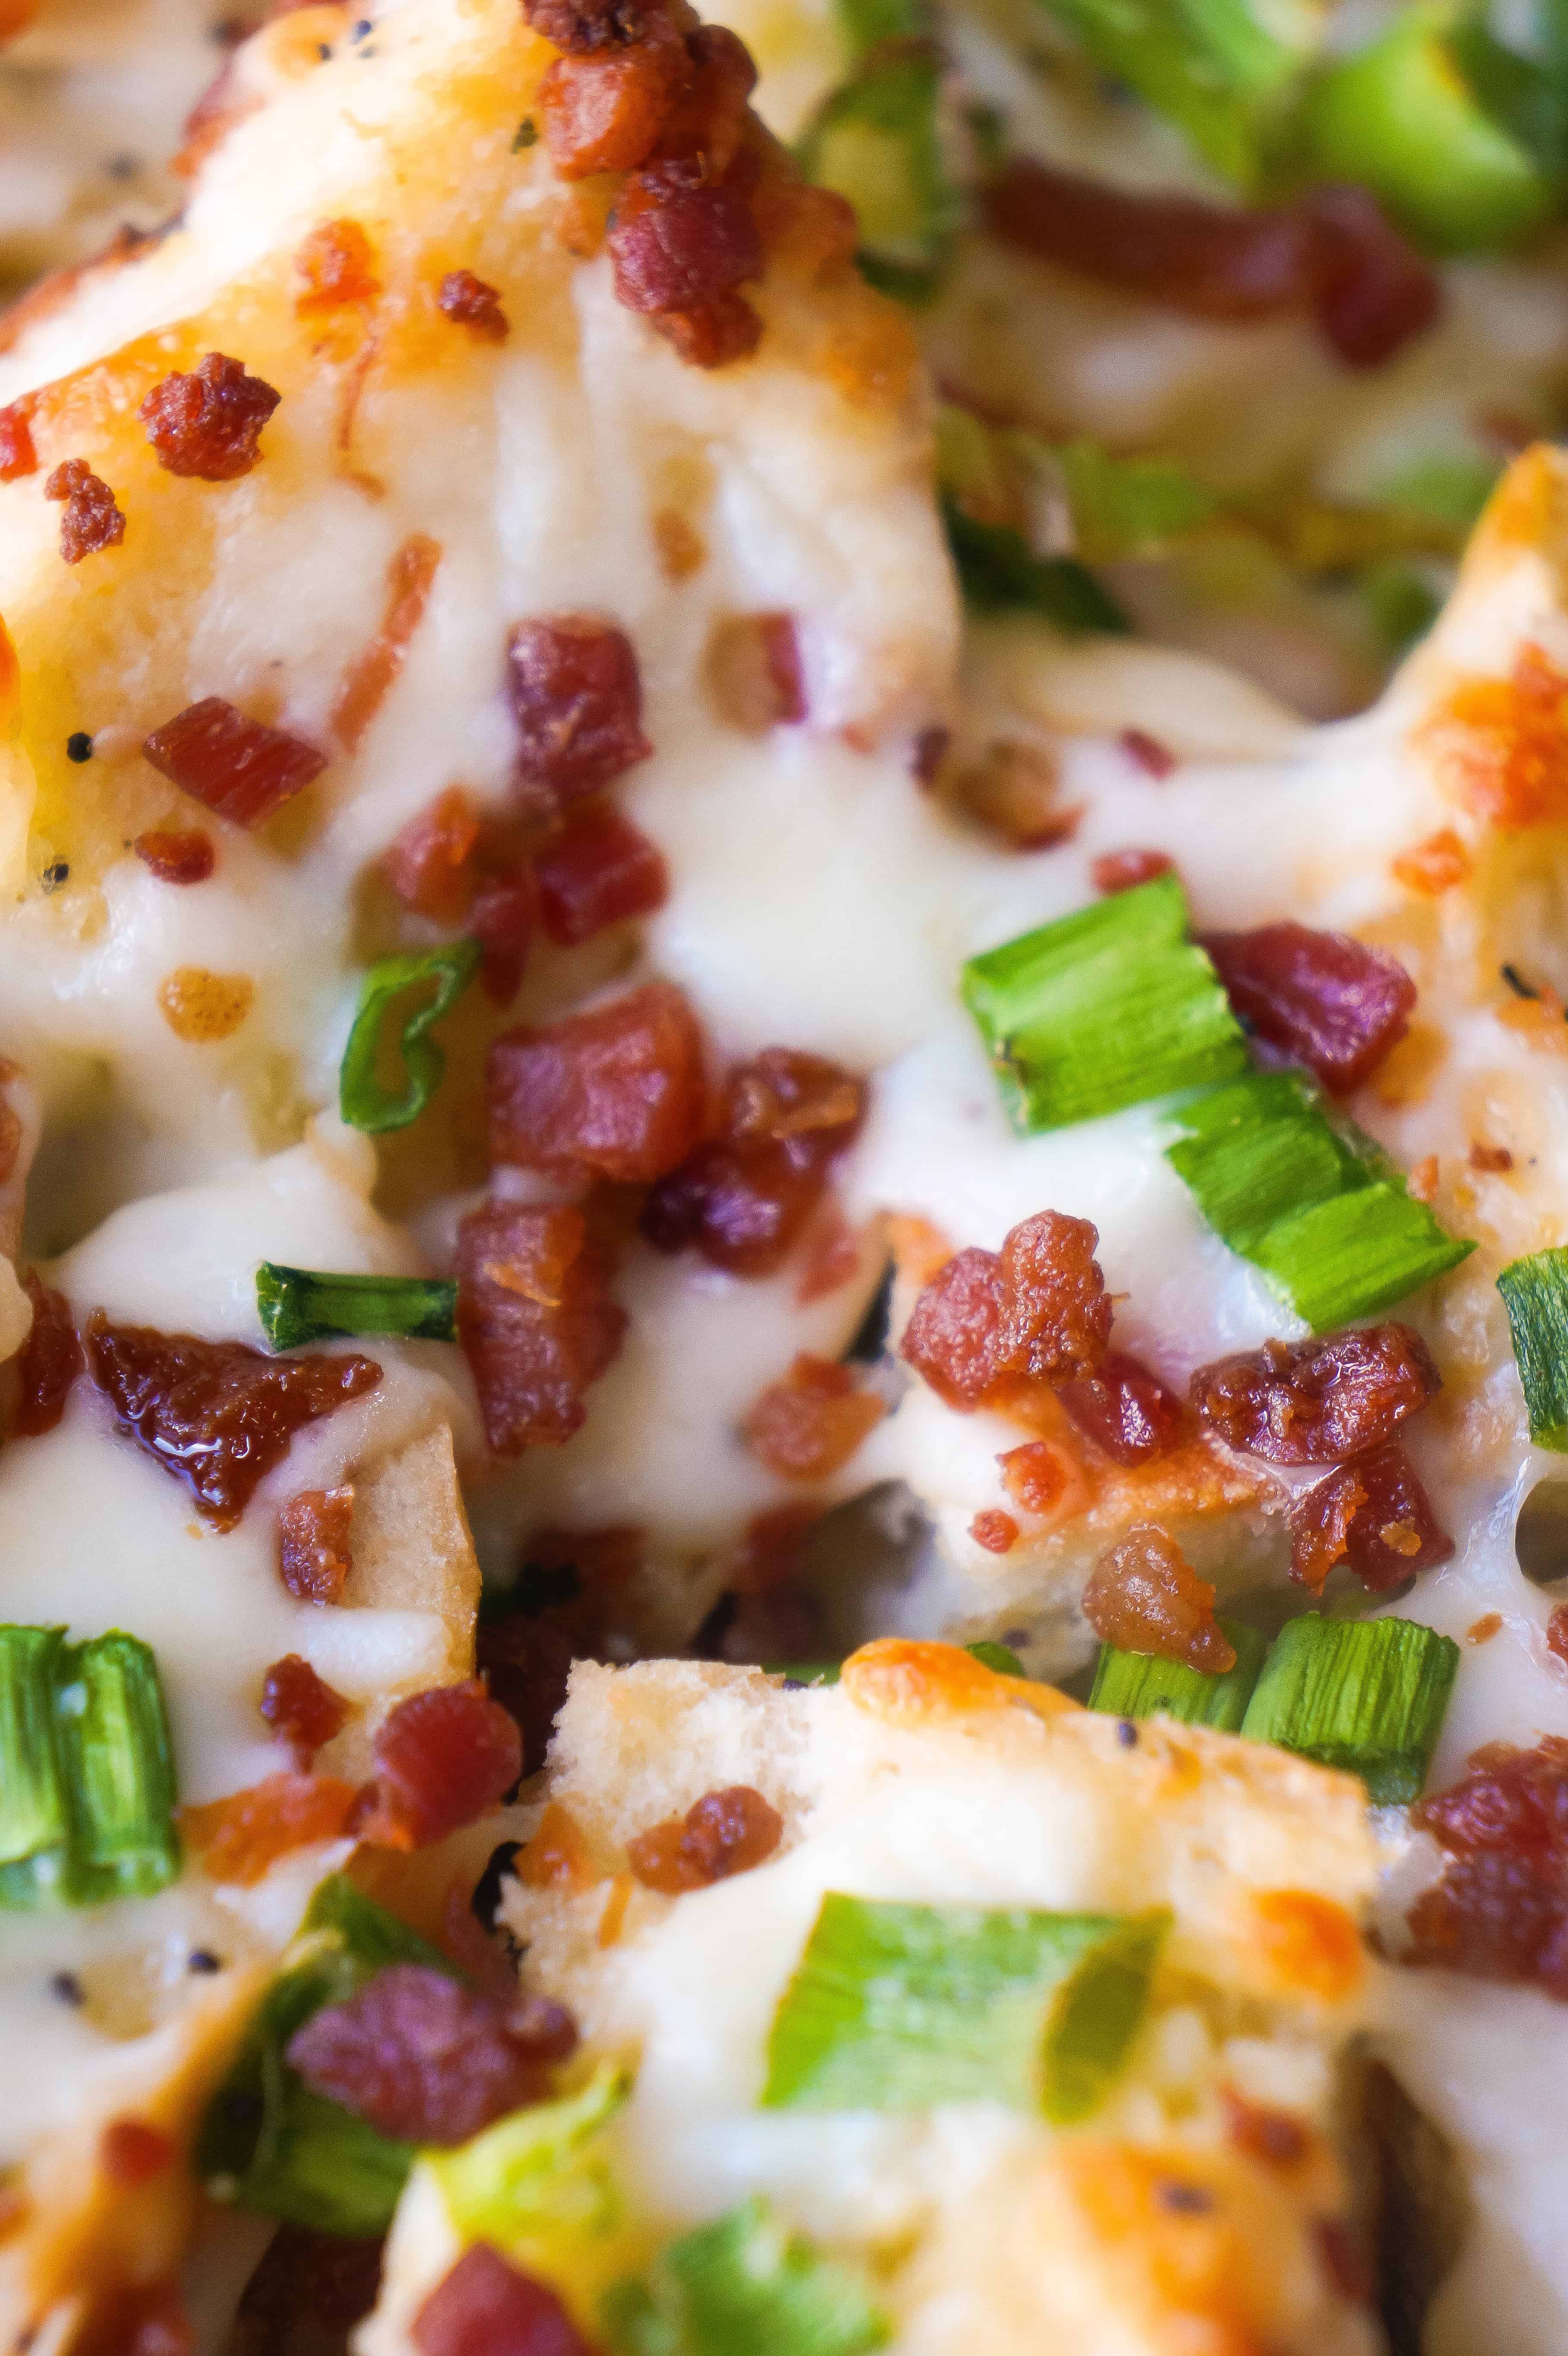 Everything Bagel Cheesy Bacon Pull Apart is the perfect party food. This cheesy garlic bread made with everything bagels and loaded with bacon is great for sharing.